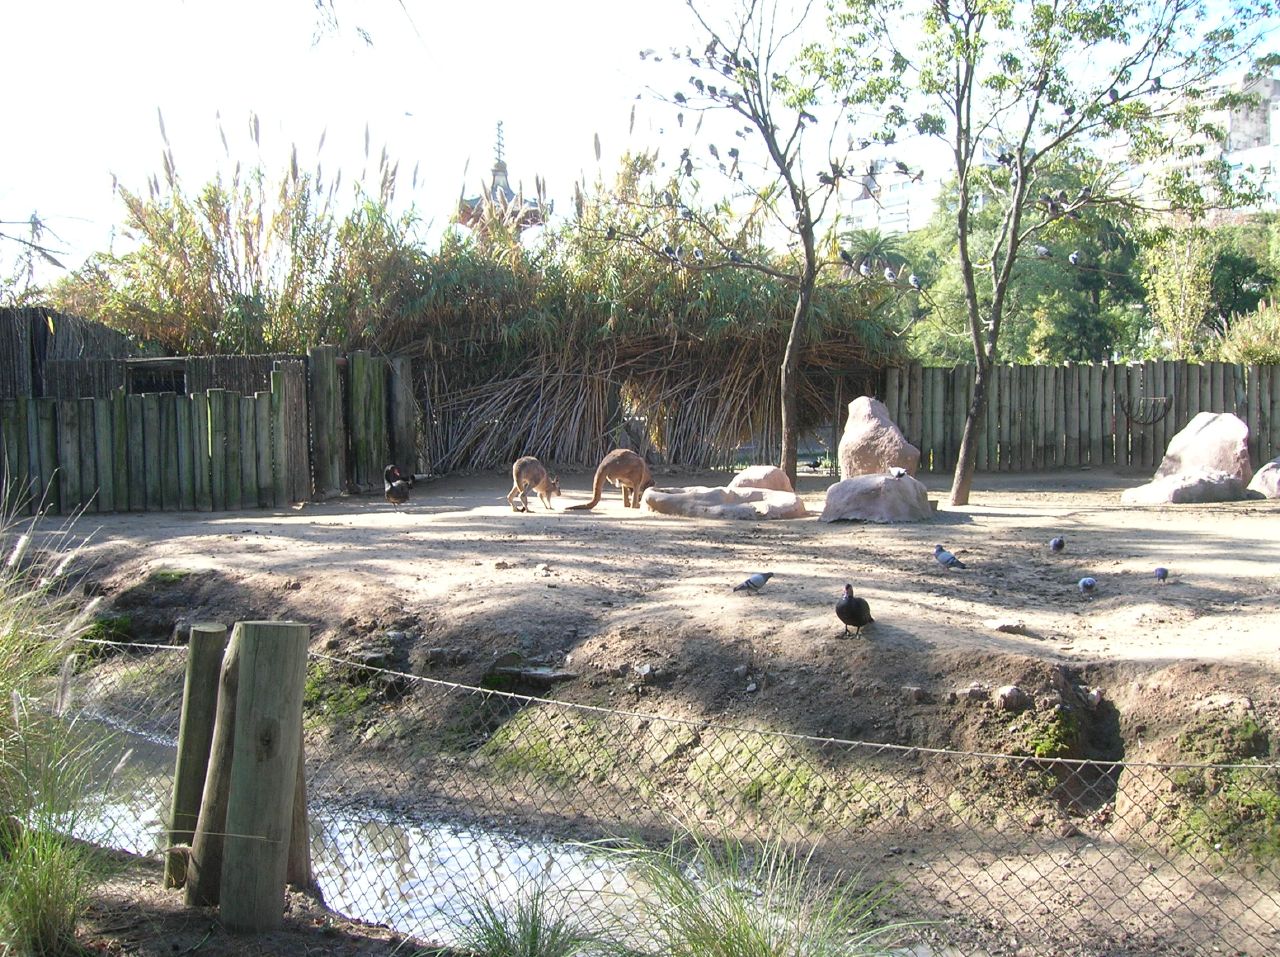 animals in a cage in an enclosure next to water